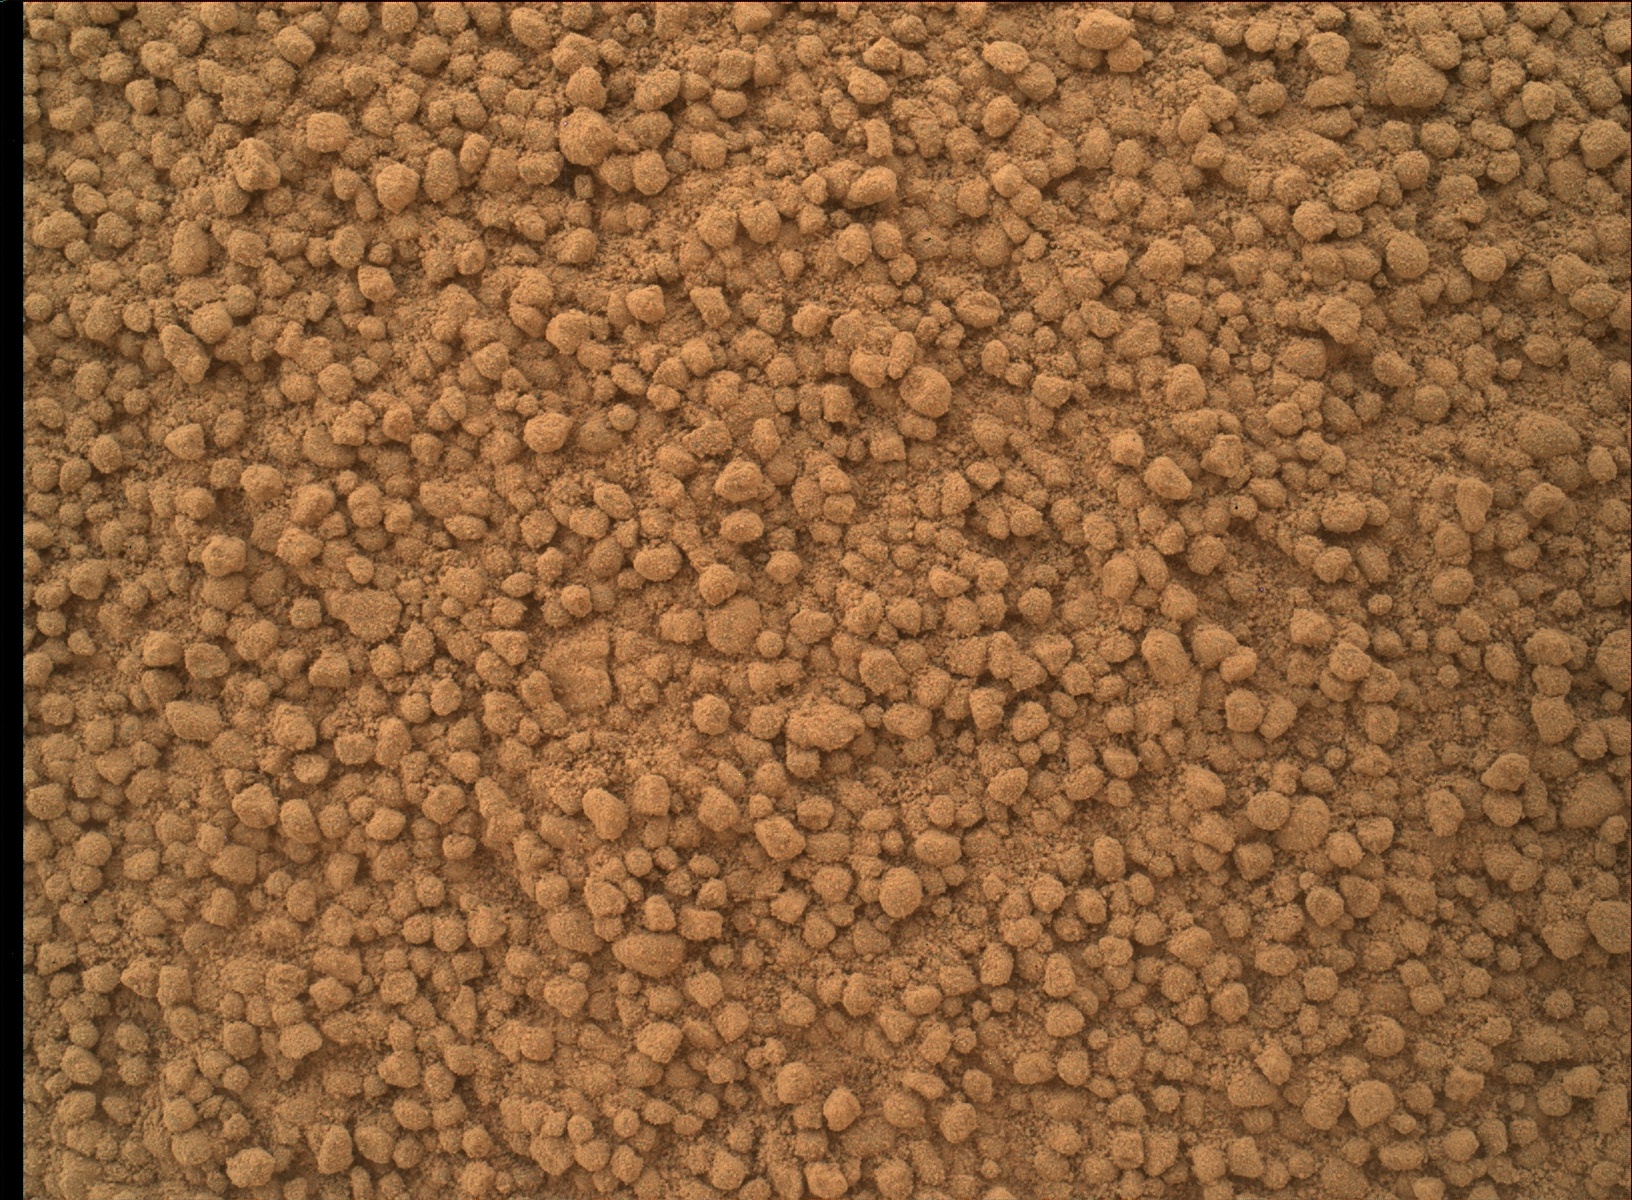 Nasa's Mars rover Curiosity acquired this image using its Mars Hand Lens Imager (MAHLI) on Sol 61